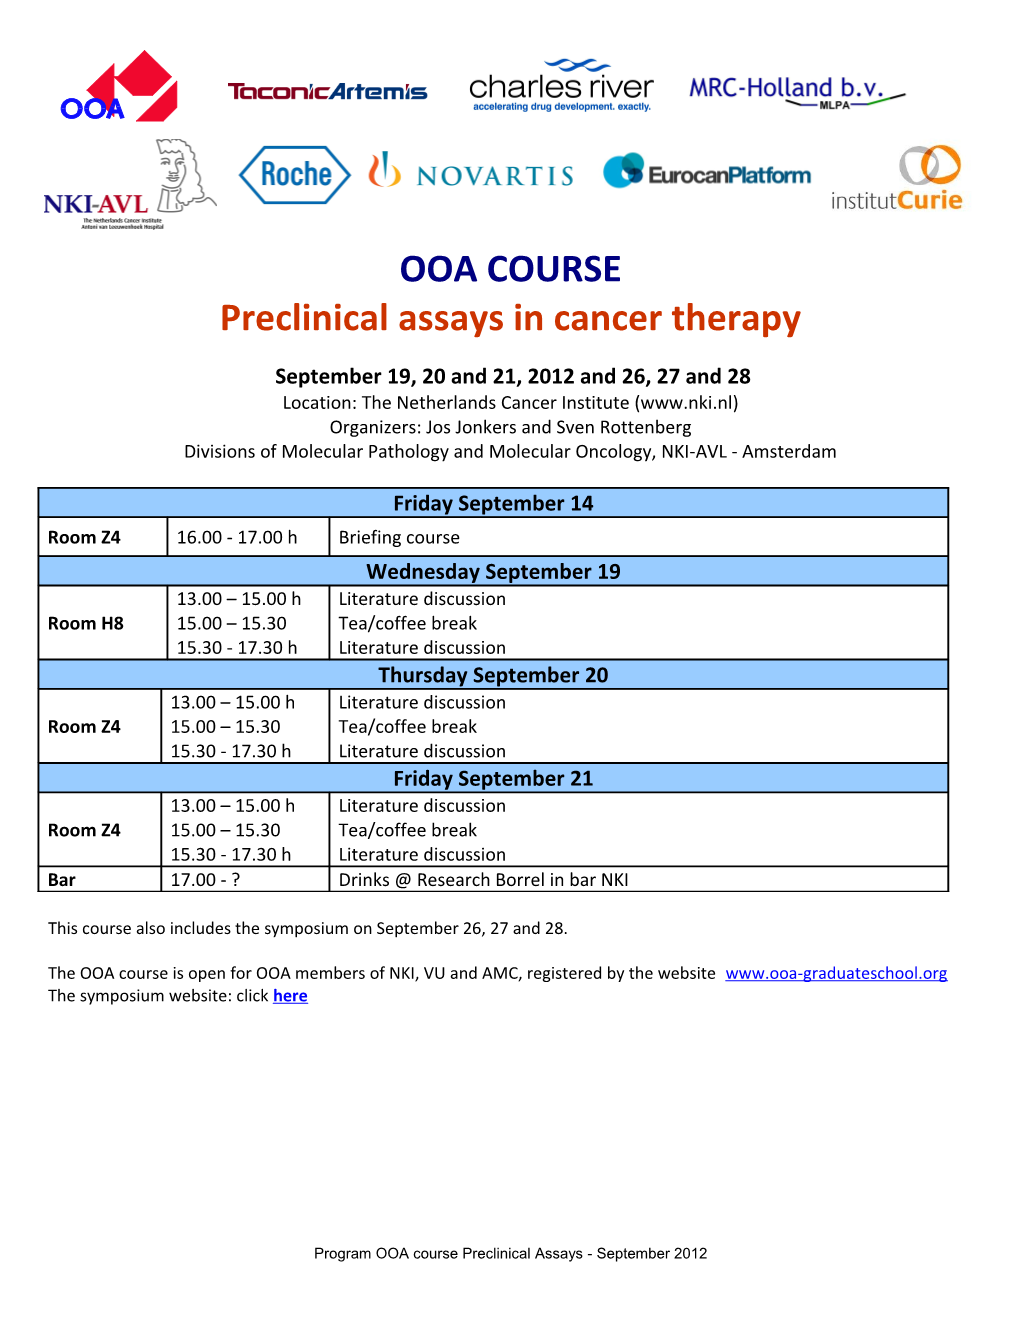 Preclinical Assays in Cancer Therapy